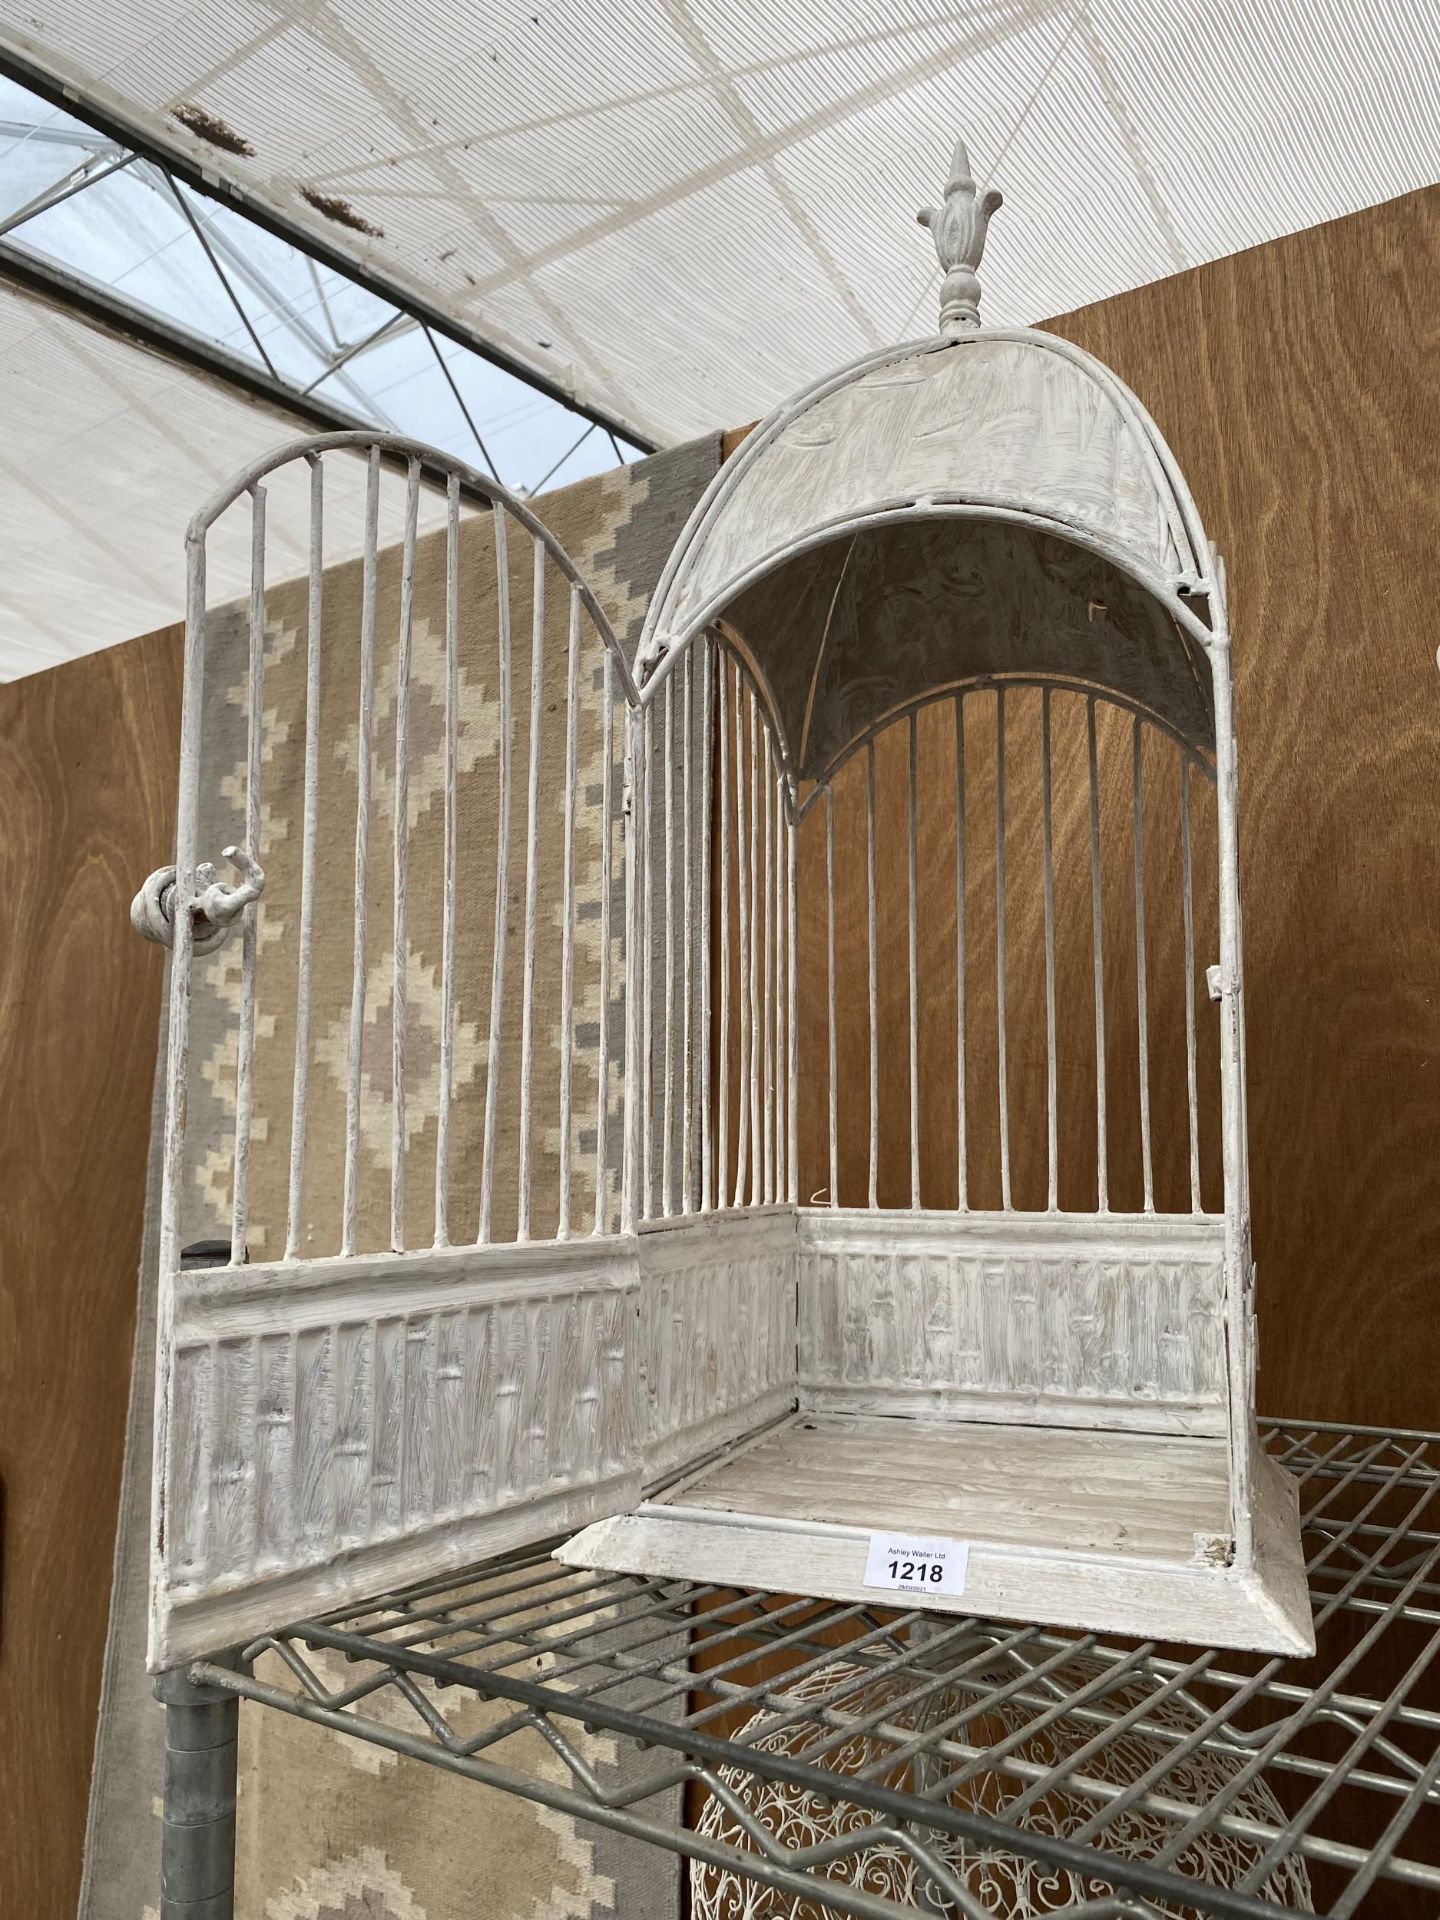 TWO DECORATIVE METAL BIRD CAGES - Image 5 of 5